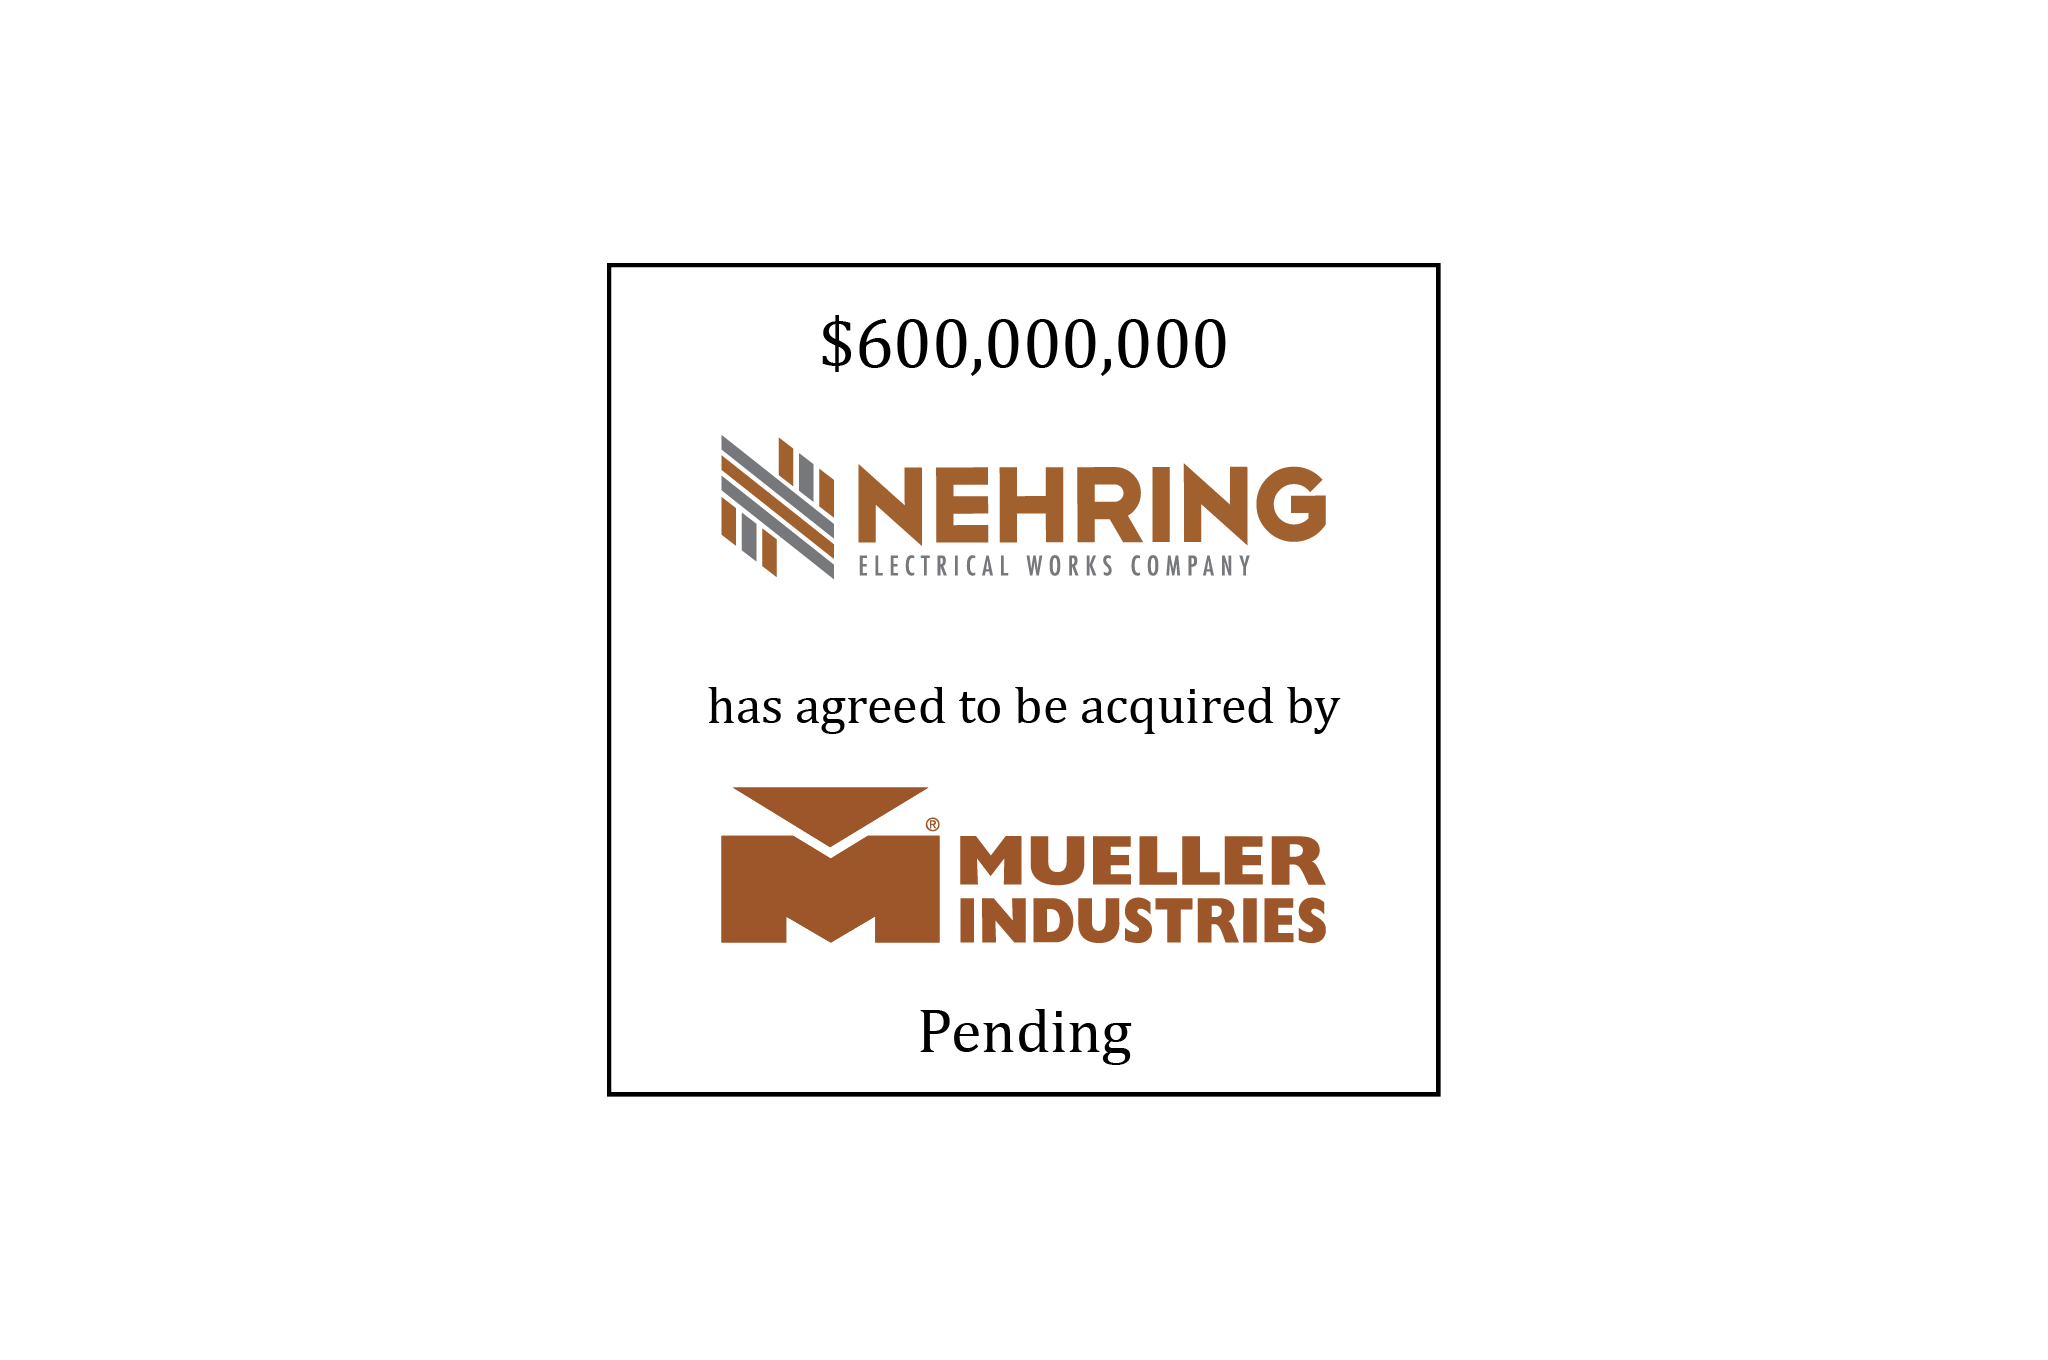 $600,000,000 | Nehring Electrical Works Company (logo) has agreed to be acquired by Mueller Industries (logo) | Pending